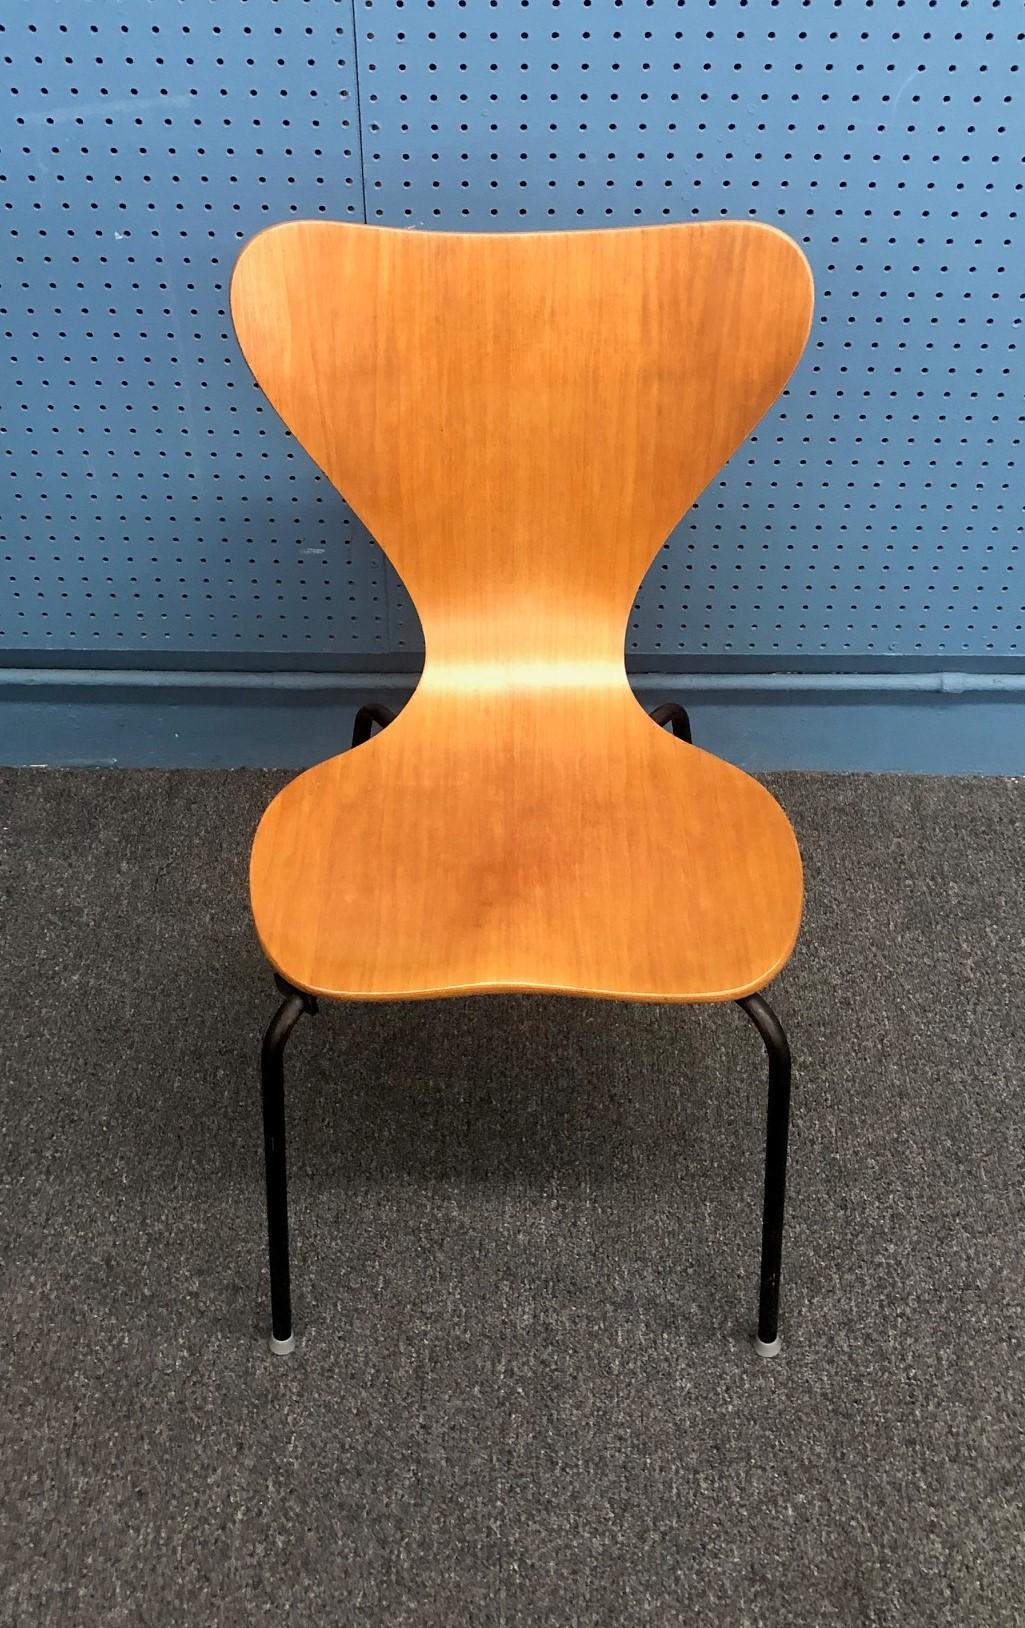 A very rare Danish modern chair in teak by Herbert Hirche for Jofa Stalmobler, circa 1950s. The chair was made in Denmark of thick plywood with teak veneer; the base is black painted tubular steel. The piece is structurally sound and sits great!